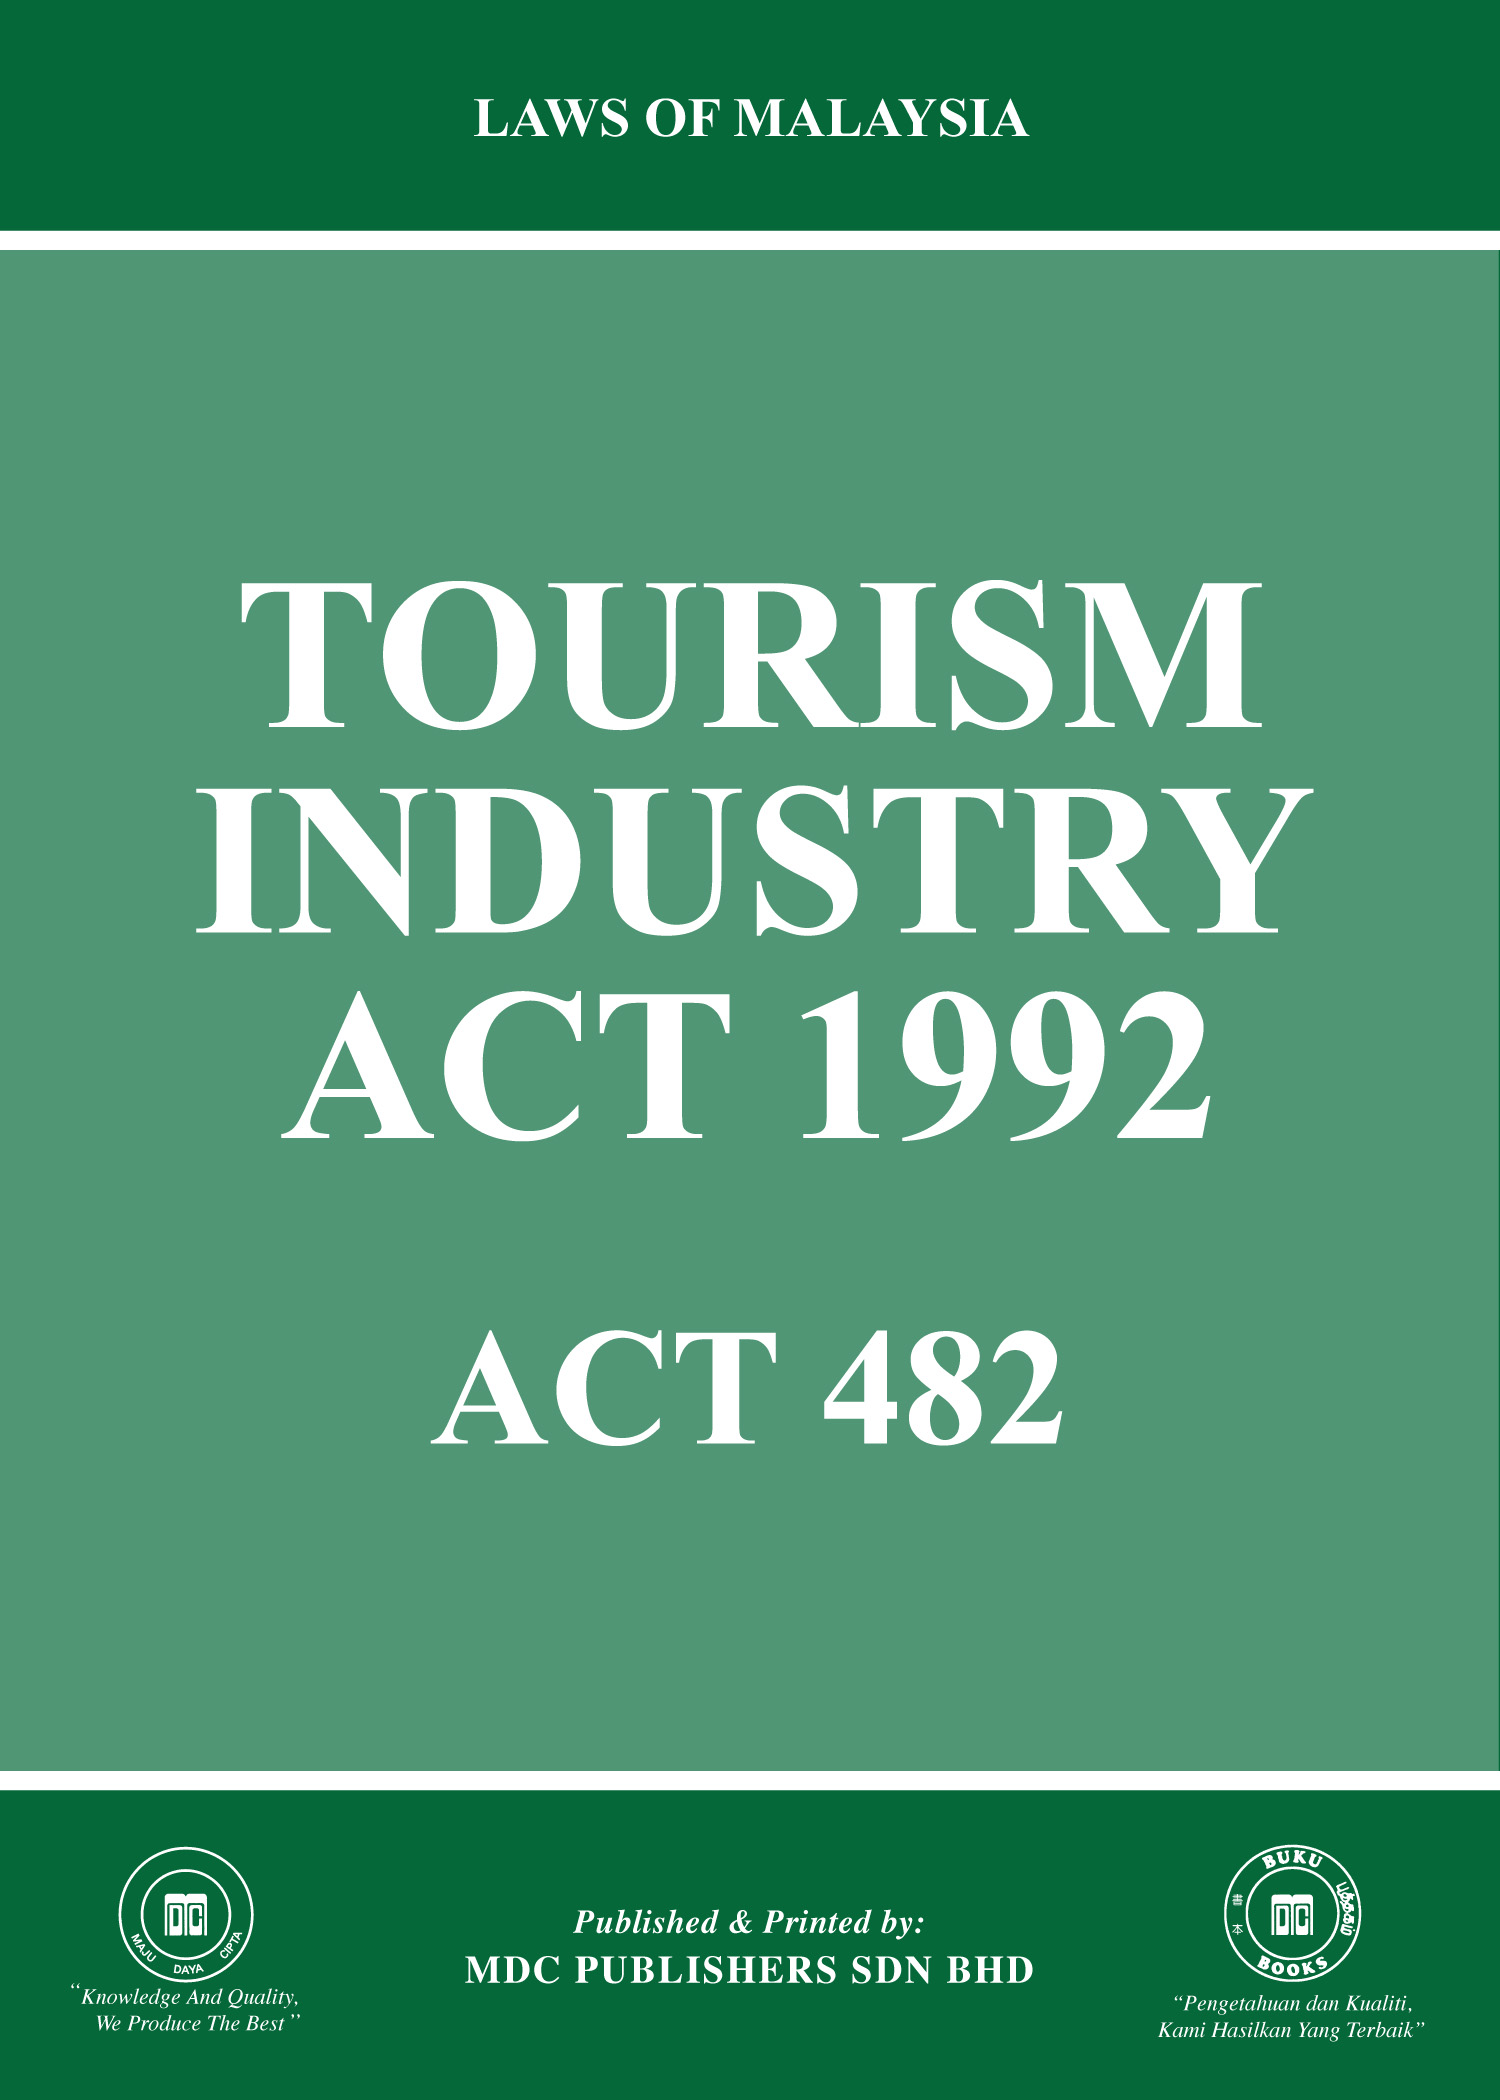 tourism industry act 1992 malaysia pdf